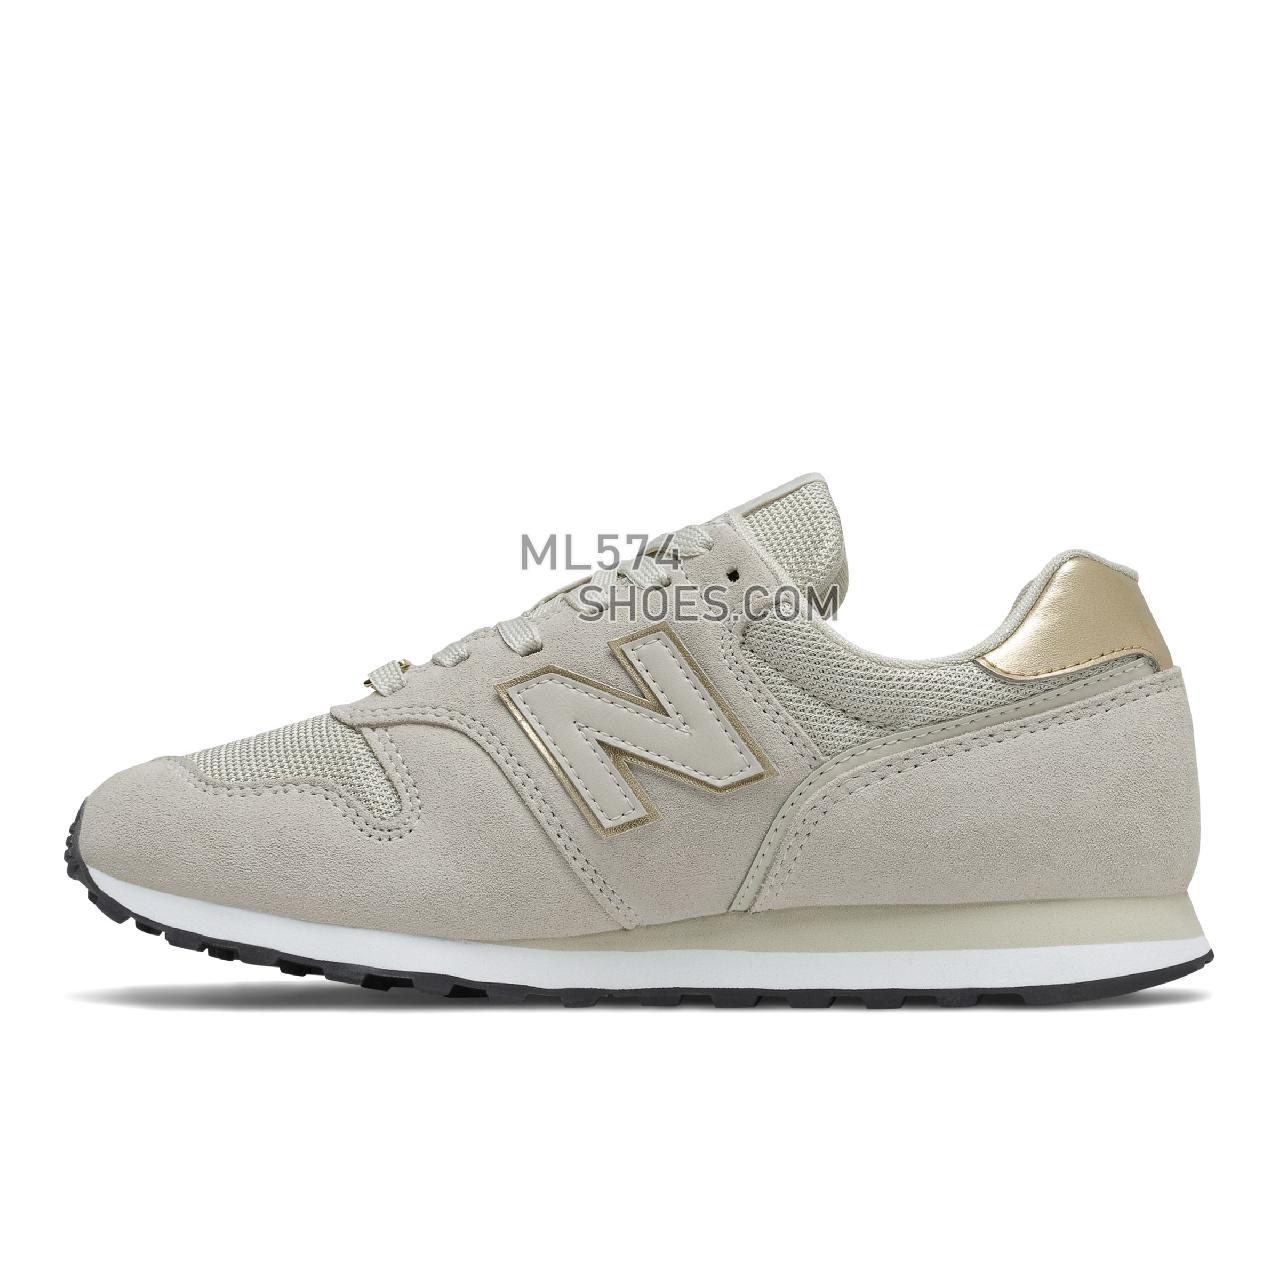 New Balance 373V2 - Women's Classic Sneakers - Silver Birch with Gold Metallic - WL373MT2